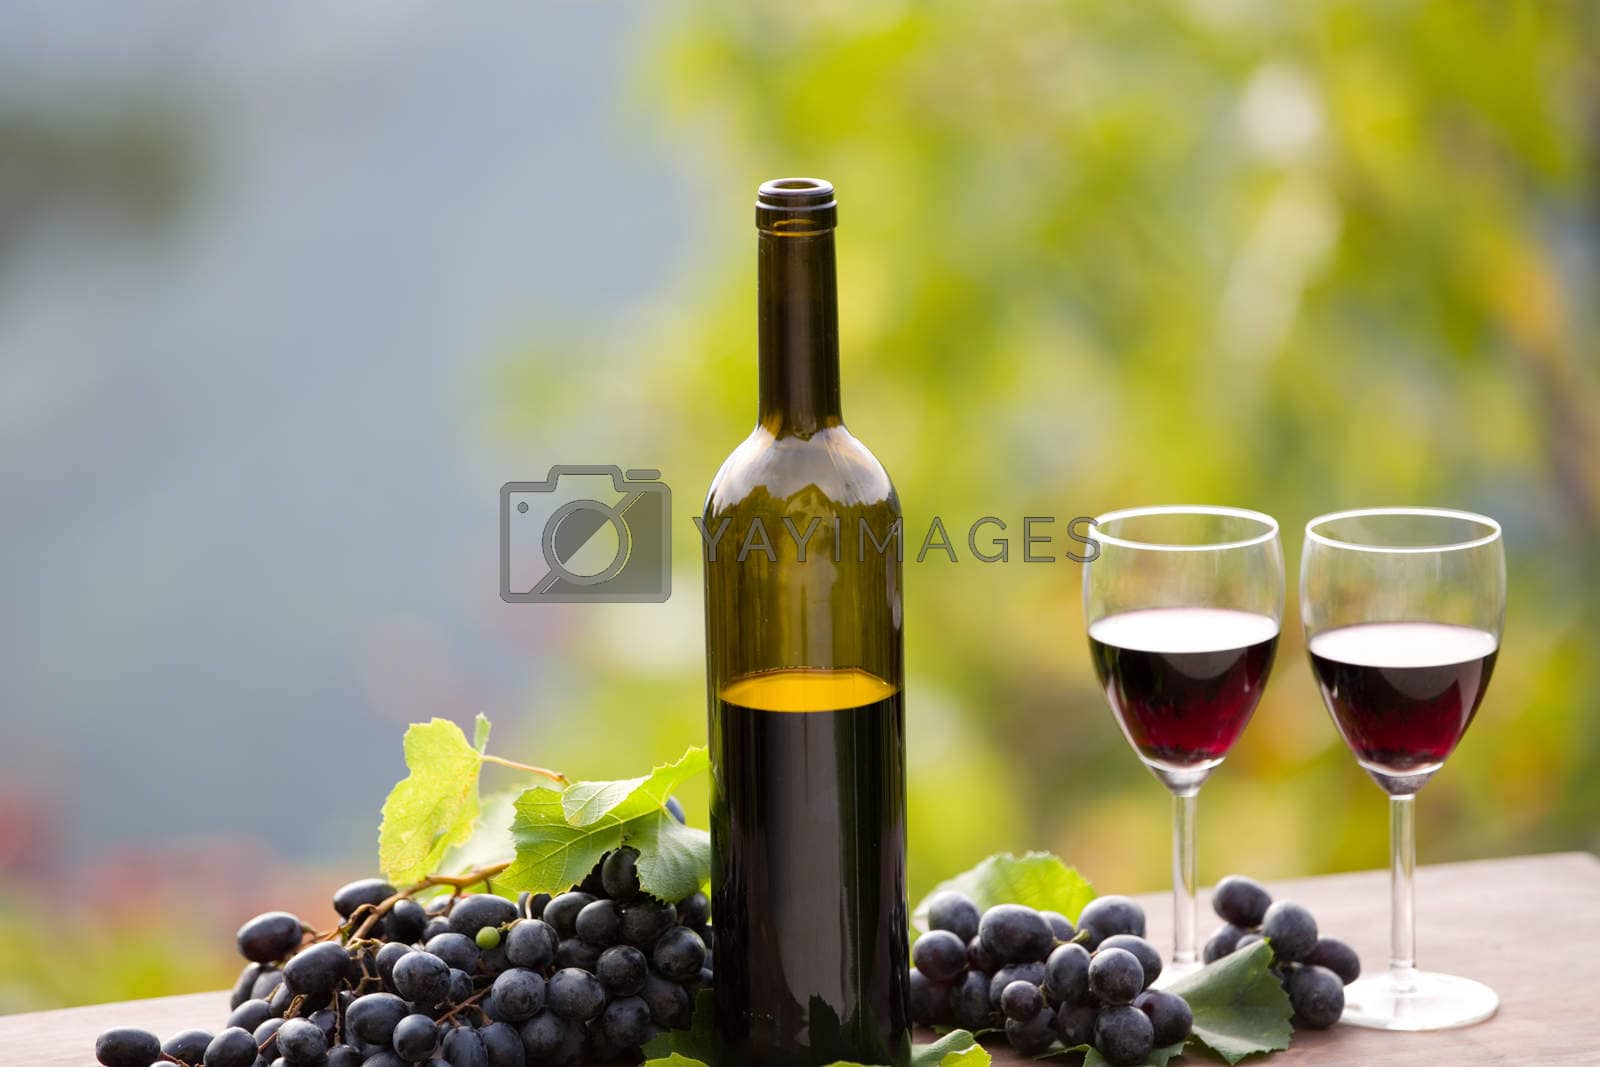 Royalty free image of Red wine by zittto